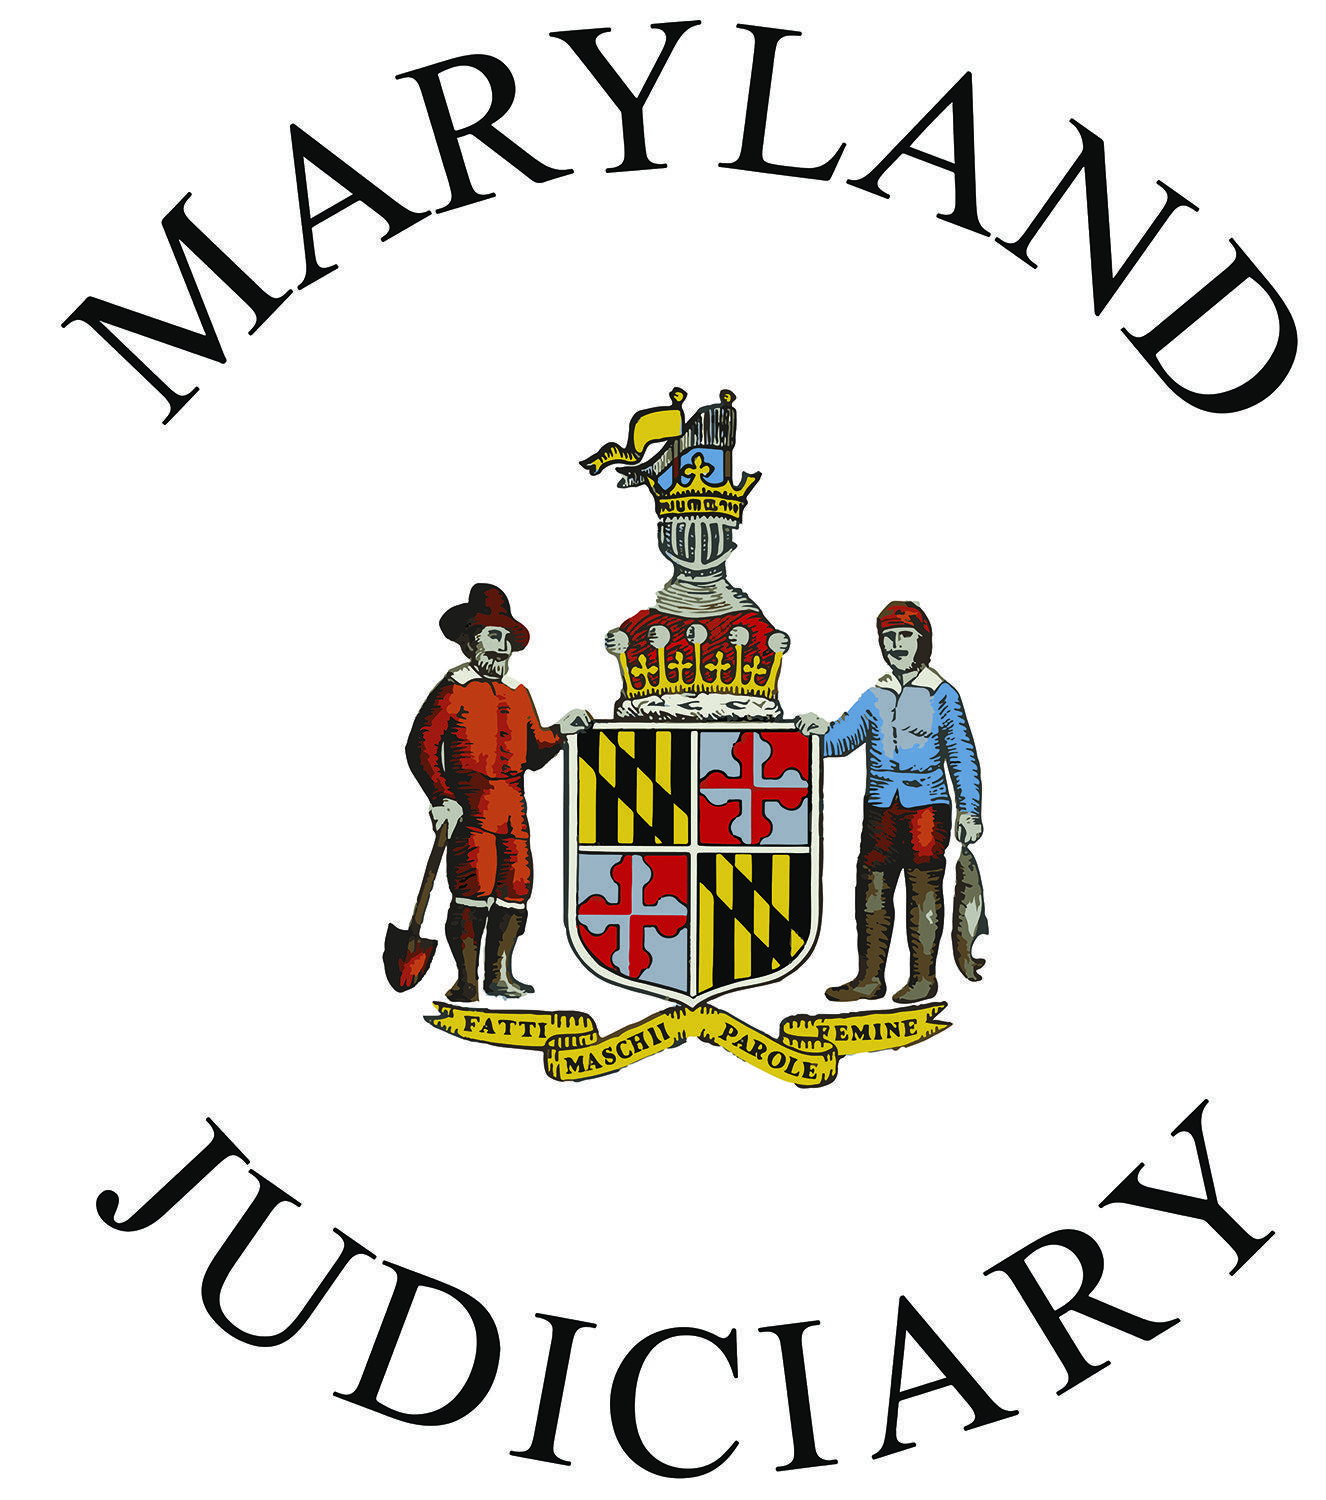 Judiciary Logo - Assistant Manager, School of Judicial Education in Annapolis ...